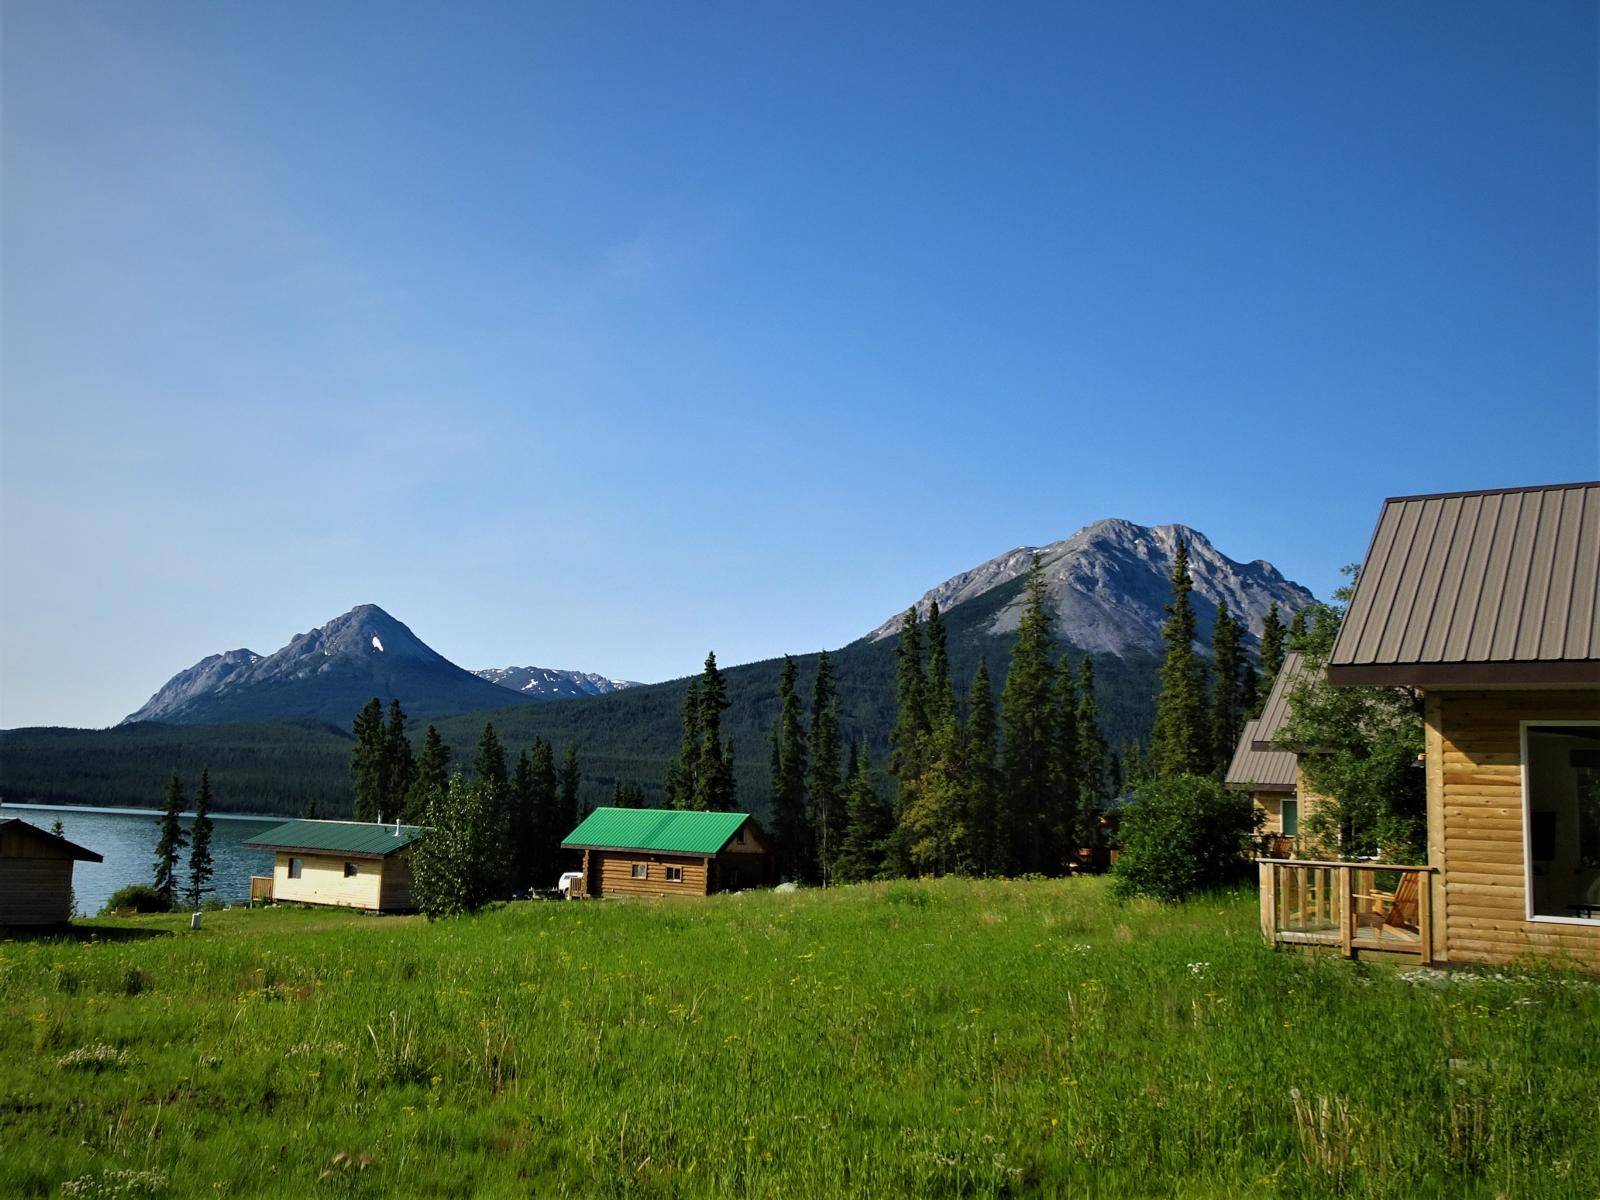 logcabins on meadow, mountains in background